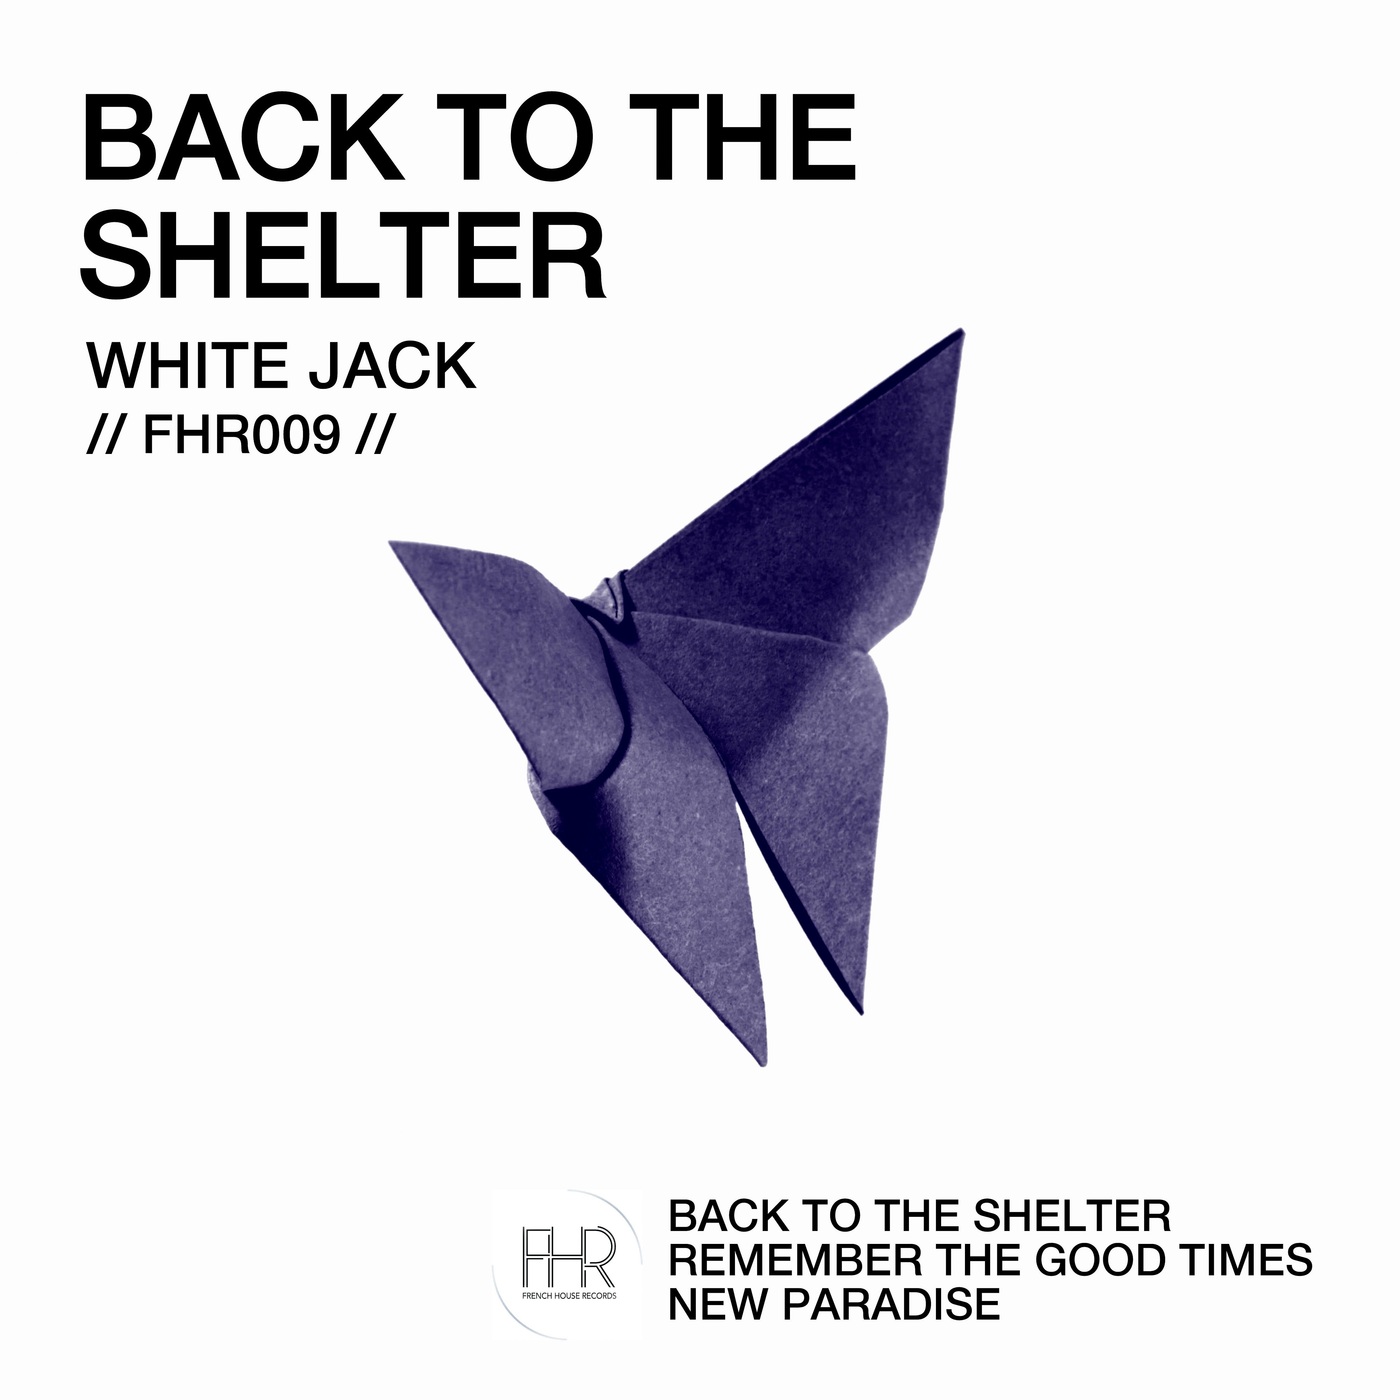 White Jack - Back to the Shelter / French House Records